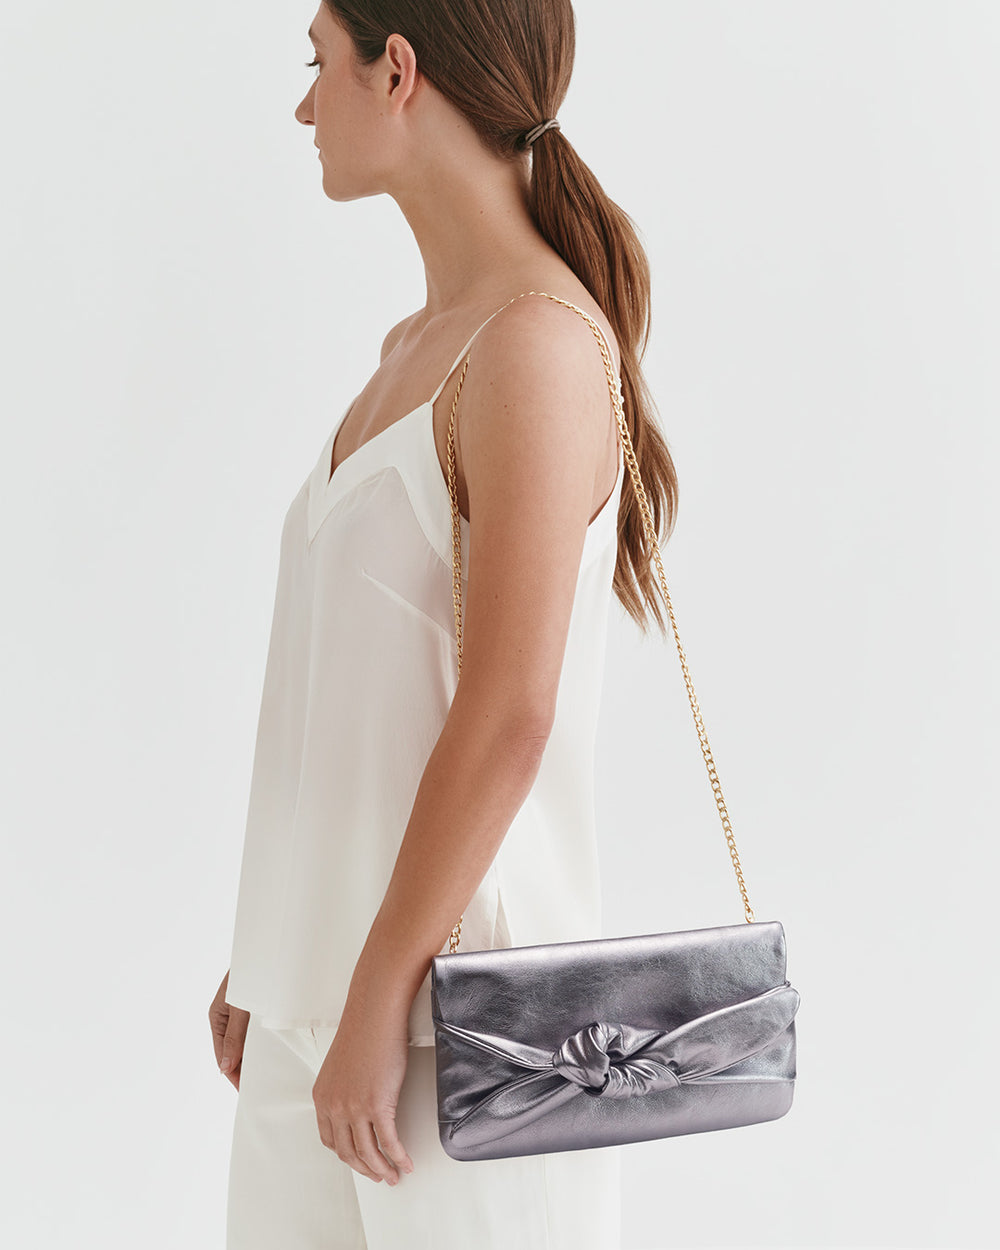 Woman standing with a handbag over her shoulder.